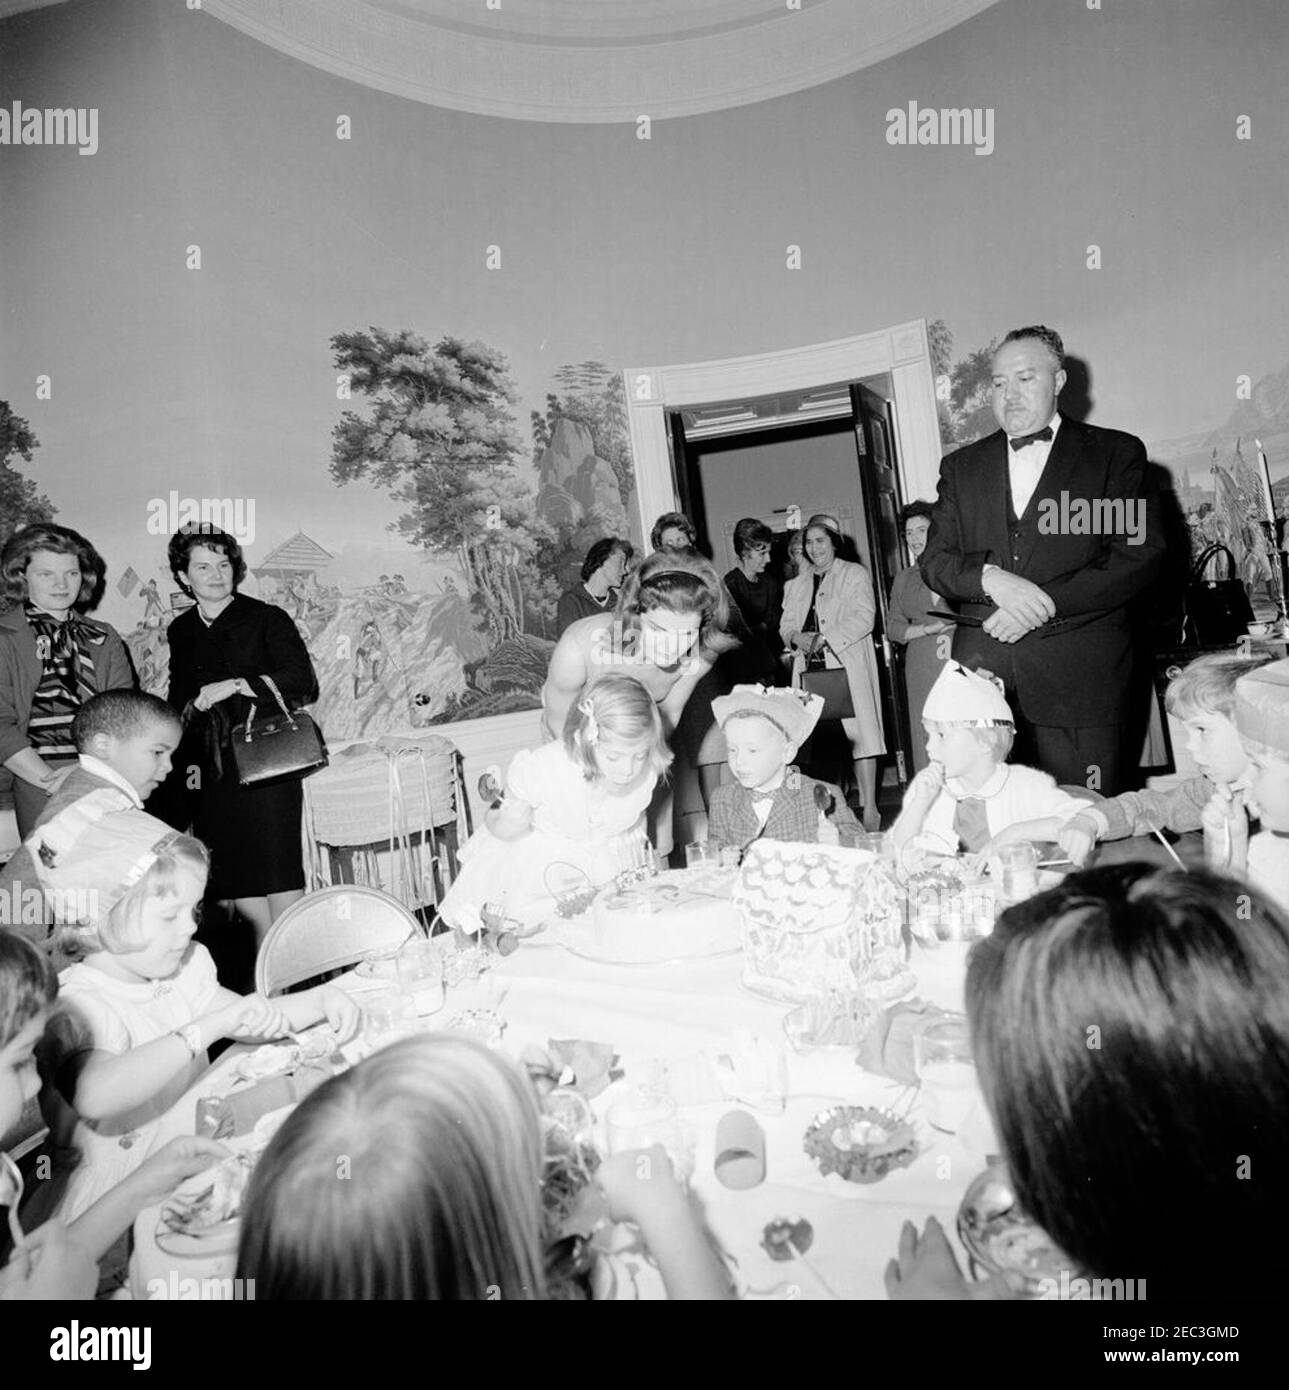 Birthday party for Caroline Kennedy and John F. Kennedy, Jr.. Caroline Kennedy blows out the candles on her cake during a joint birthday party for her and her brother, John F. Kennedy, Jr.; First Lady Jacqueline Kennedy stands behind her daughter. Also pictured: Avery Hatcher, son of Associate Press Secretary, Andrew T. Hatcher; White House butler, John W. Ficklin. Presidentu2019s Dining Room (Residence), White House, Washington, D.C. Stock Photo